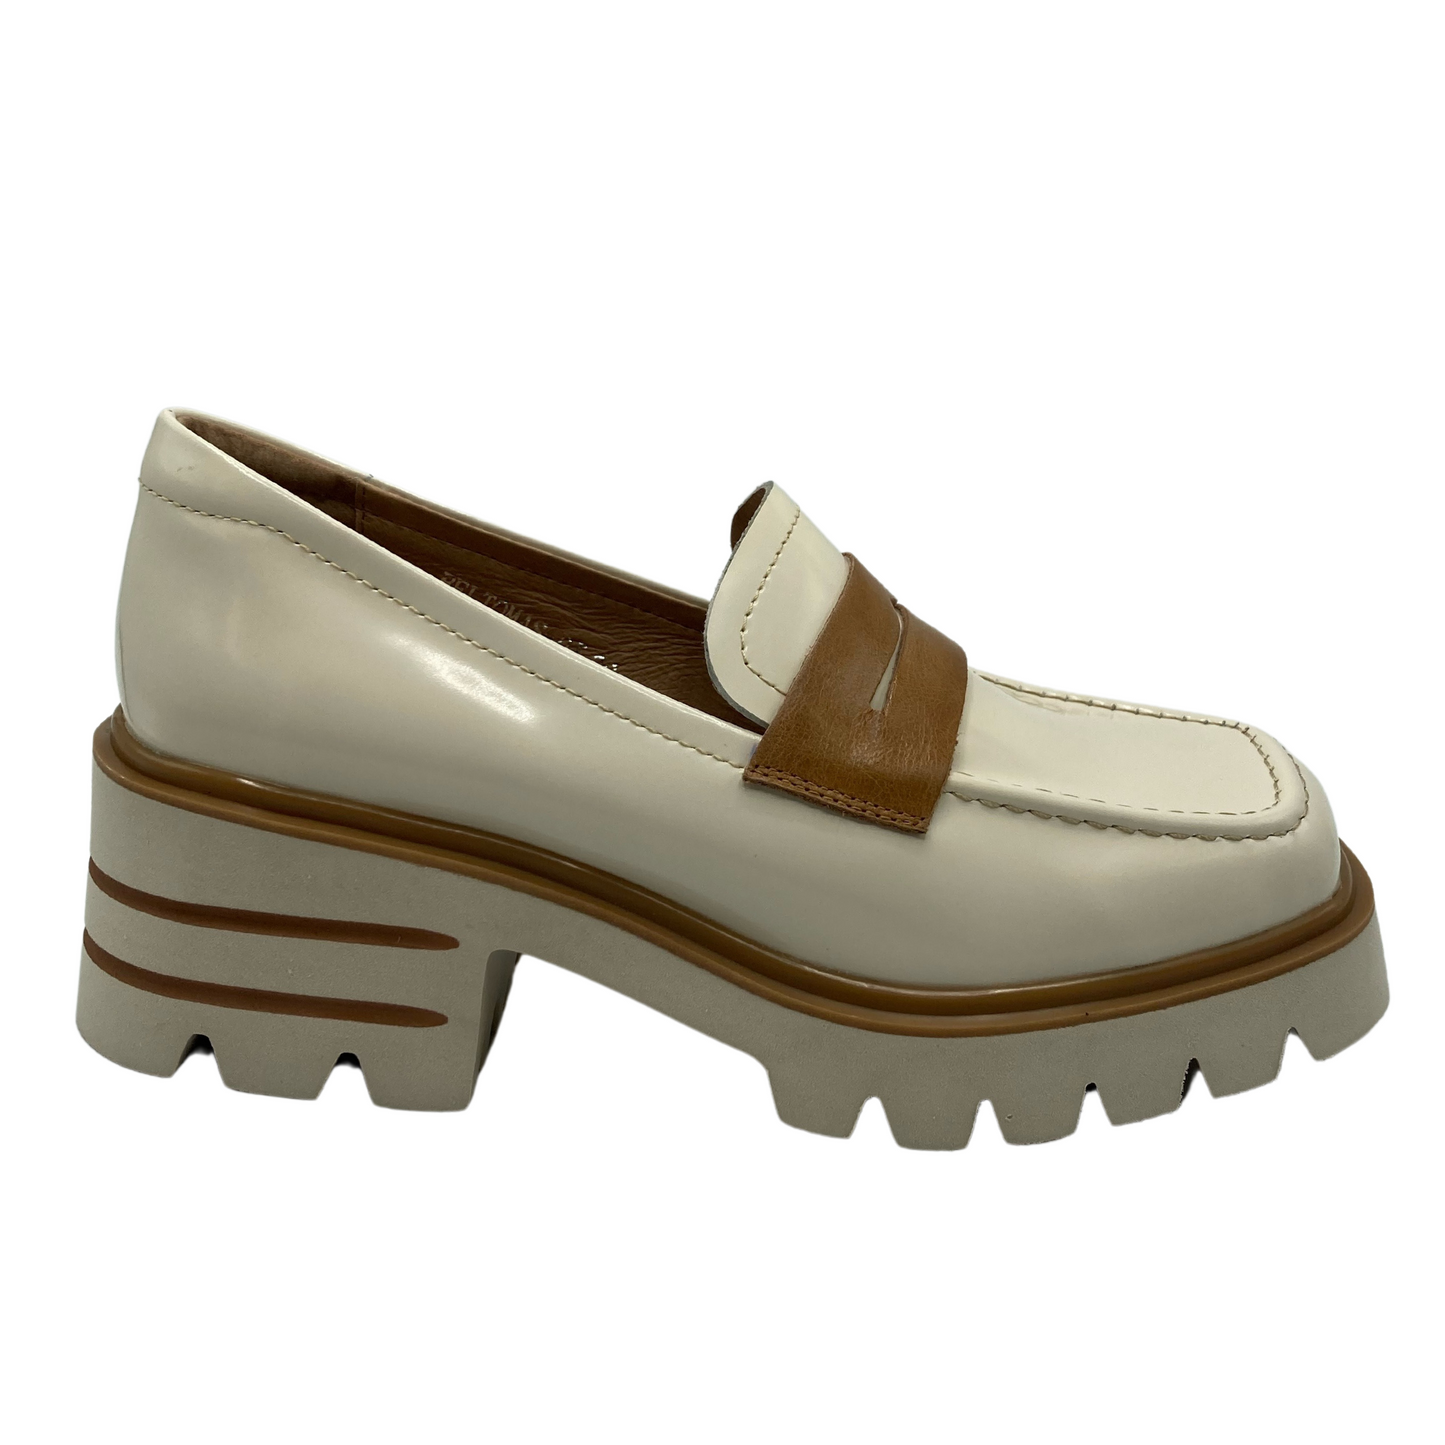 Right facing view of vanilla coloured block lheeled loafer with tan details on upper and heel